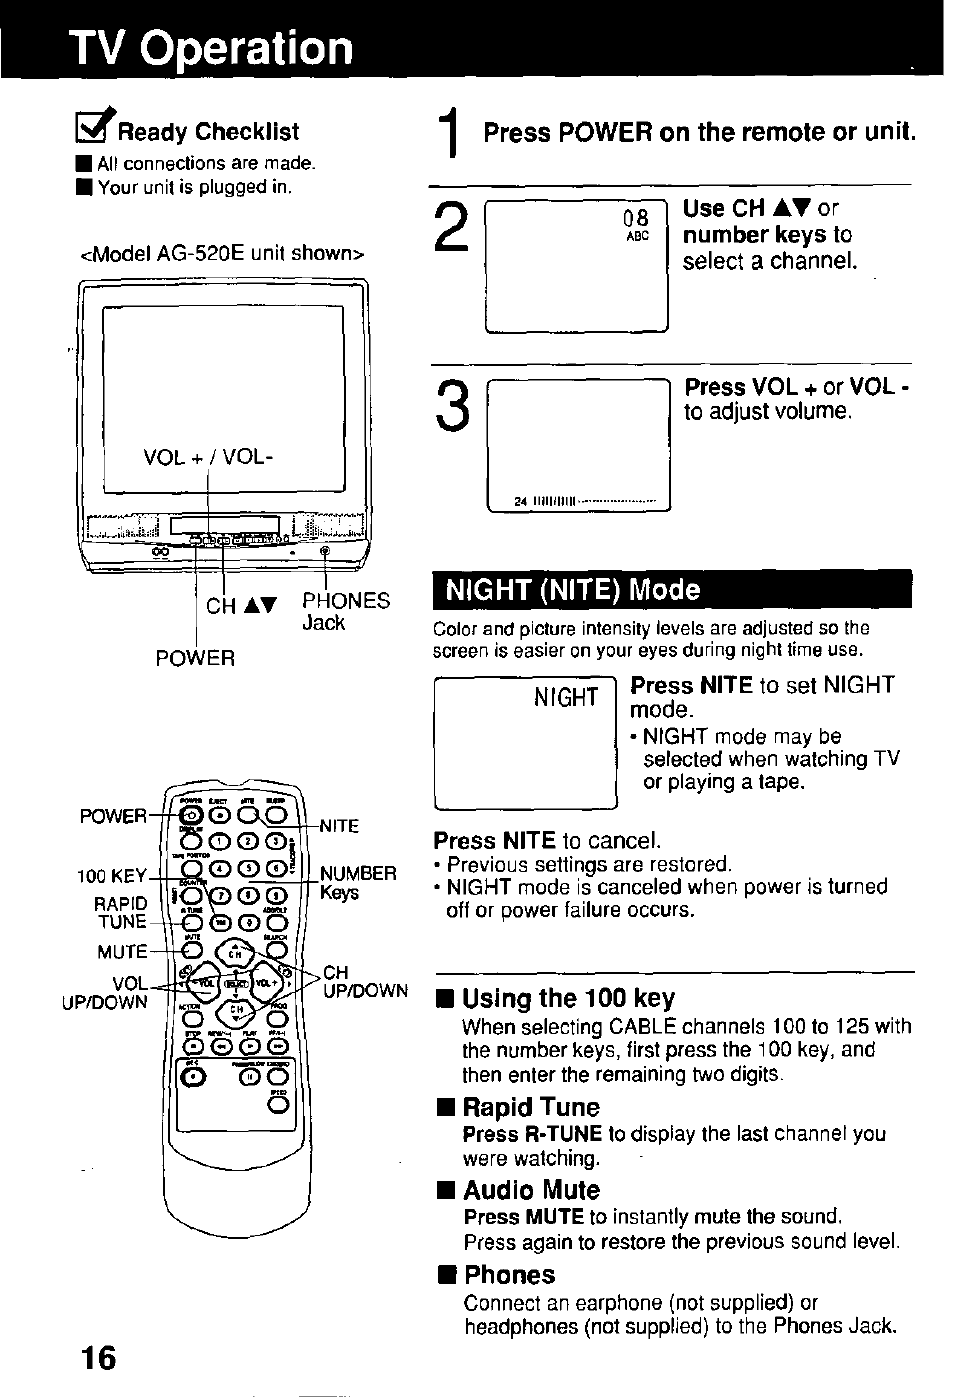 Tv operation, Select a channel, Press vol + or vol | To adjust volume, Press nite to set night mode, Press nite to cancel, Press power on the remote or unit, Night (nite) mode, Using the 100 key, Rapid tune | Panasonic Combinatin VCR AG-513E User Manual | Page 16 / 40